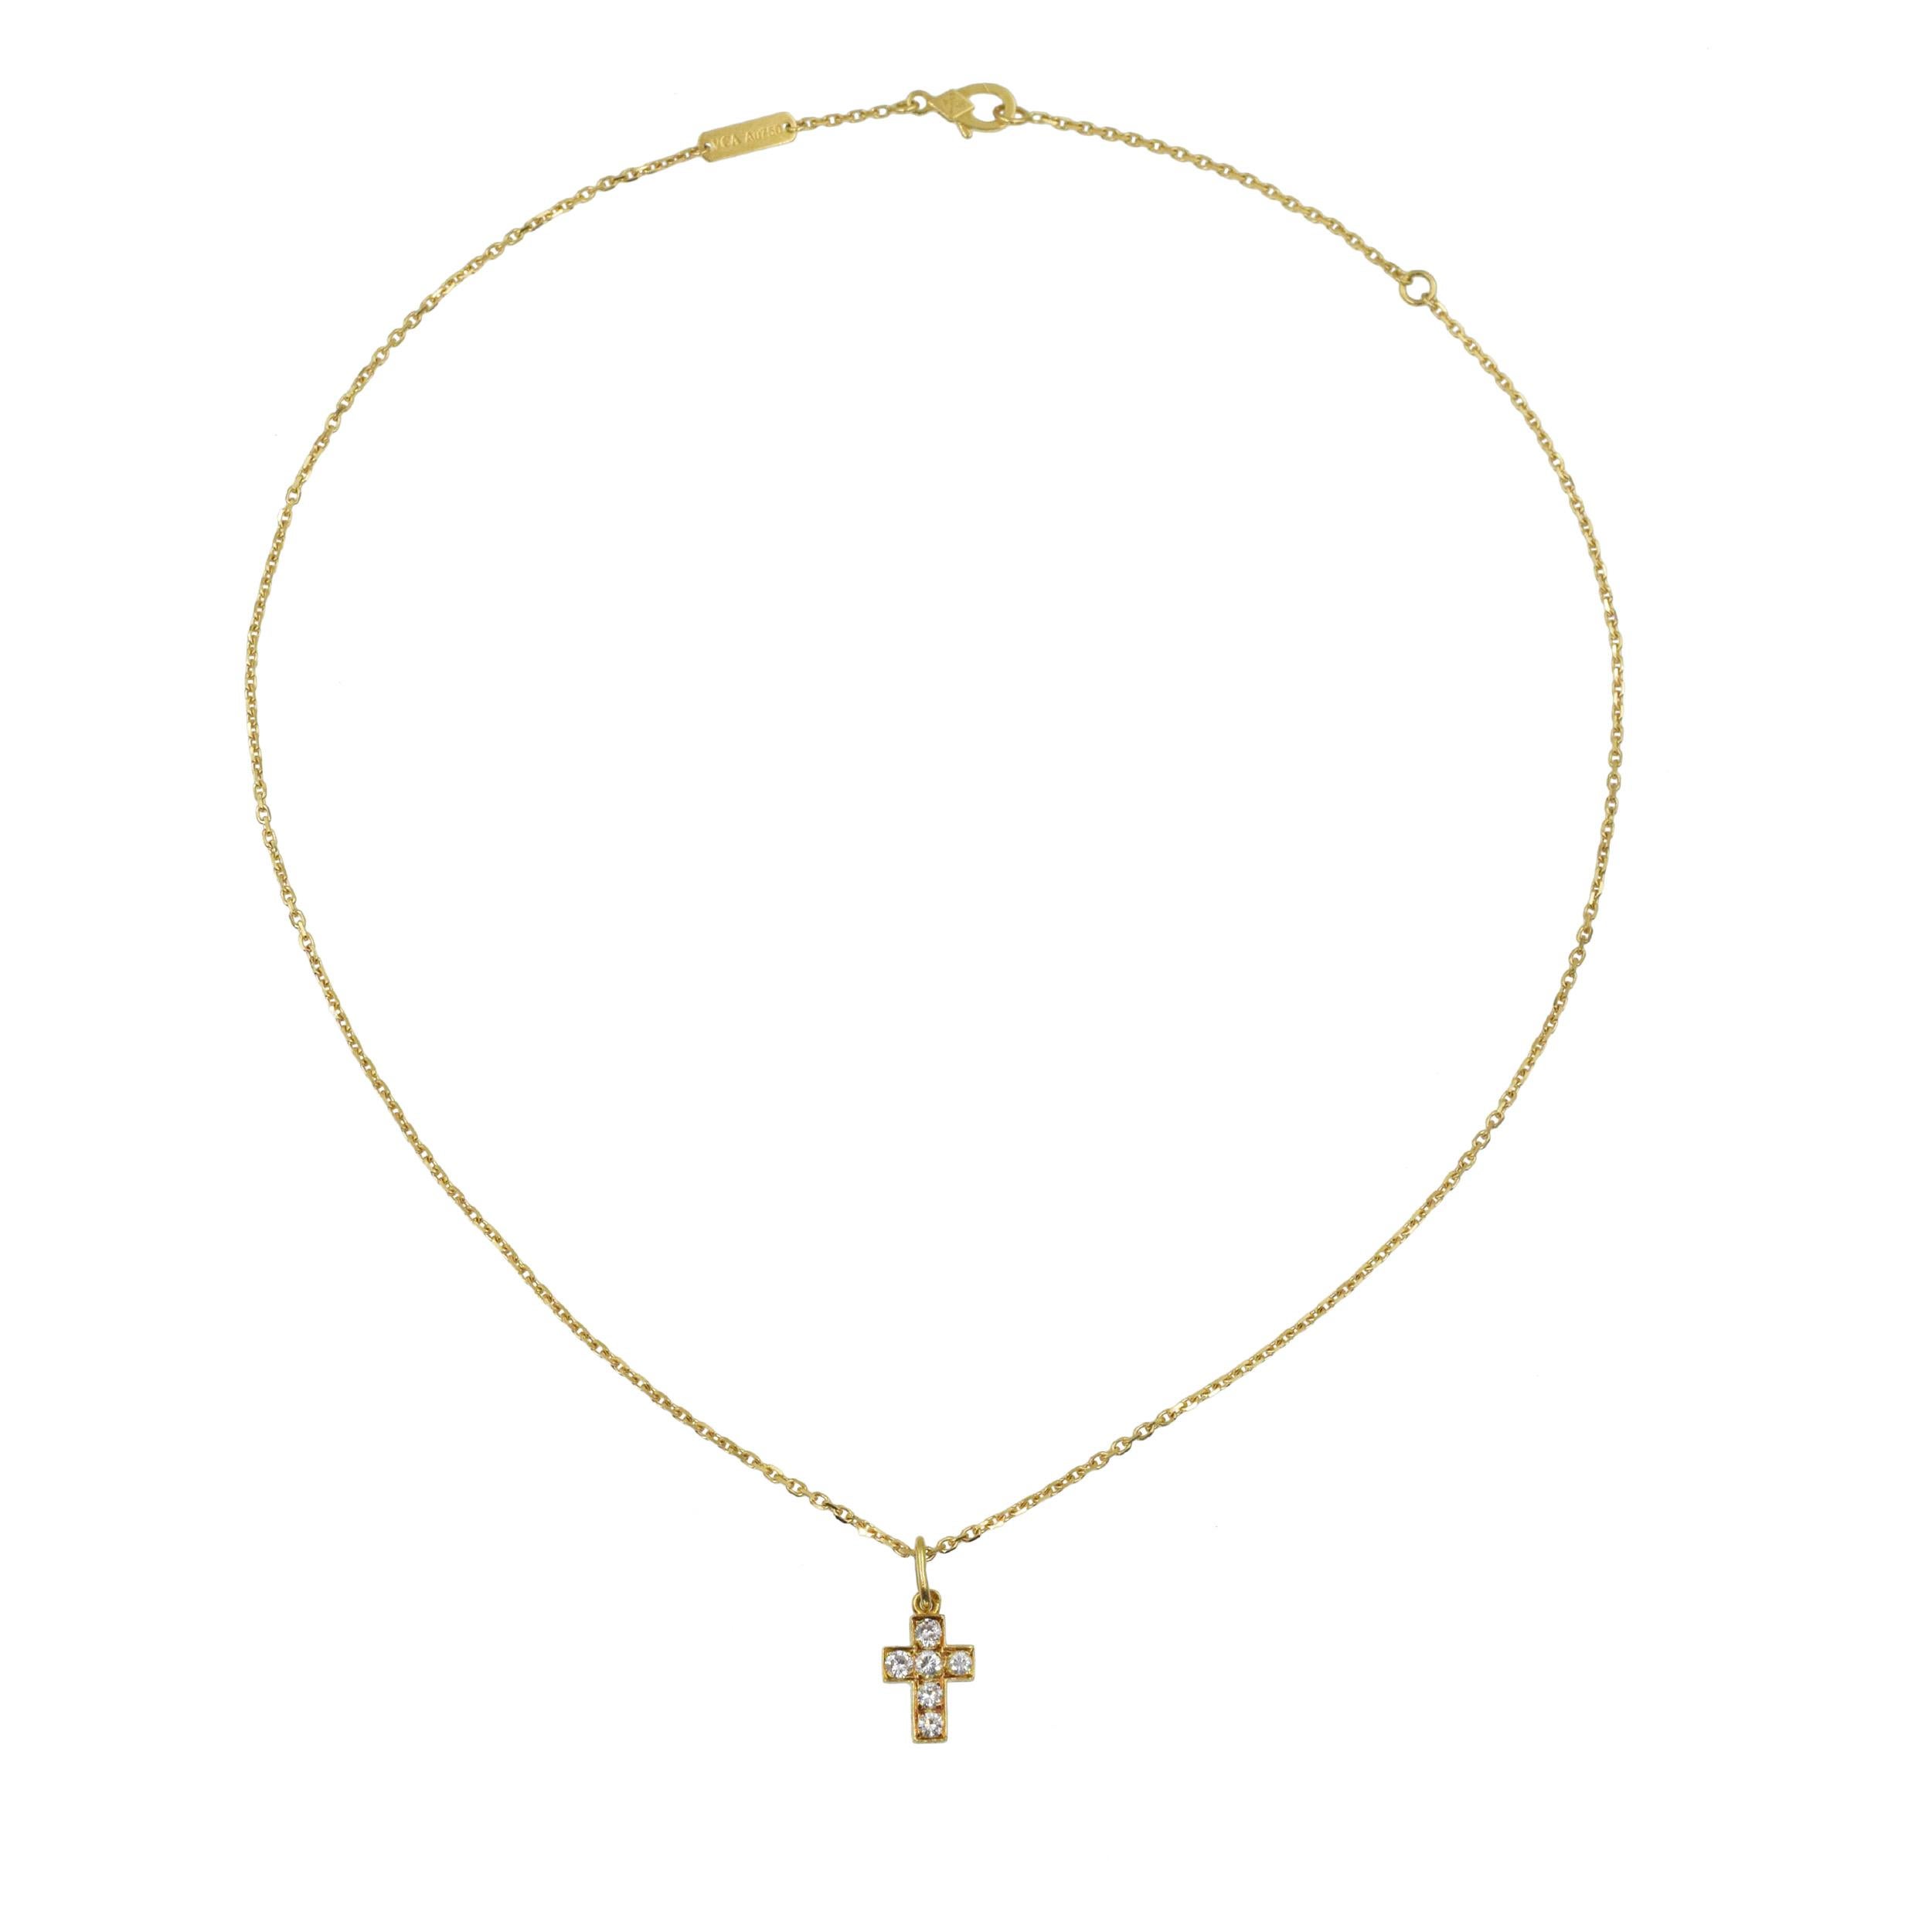 Van Cleef & Arpels diamond cross pendant necklace in 18k yellow gold. The a small cross, set with 5 round brilliant cut diamonds with total weight of approximately 0.25ct, color F-G, clarity VS. Measurements: 13mm by 8mm. Inscribed: VCA, 18k, C41